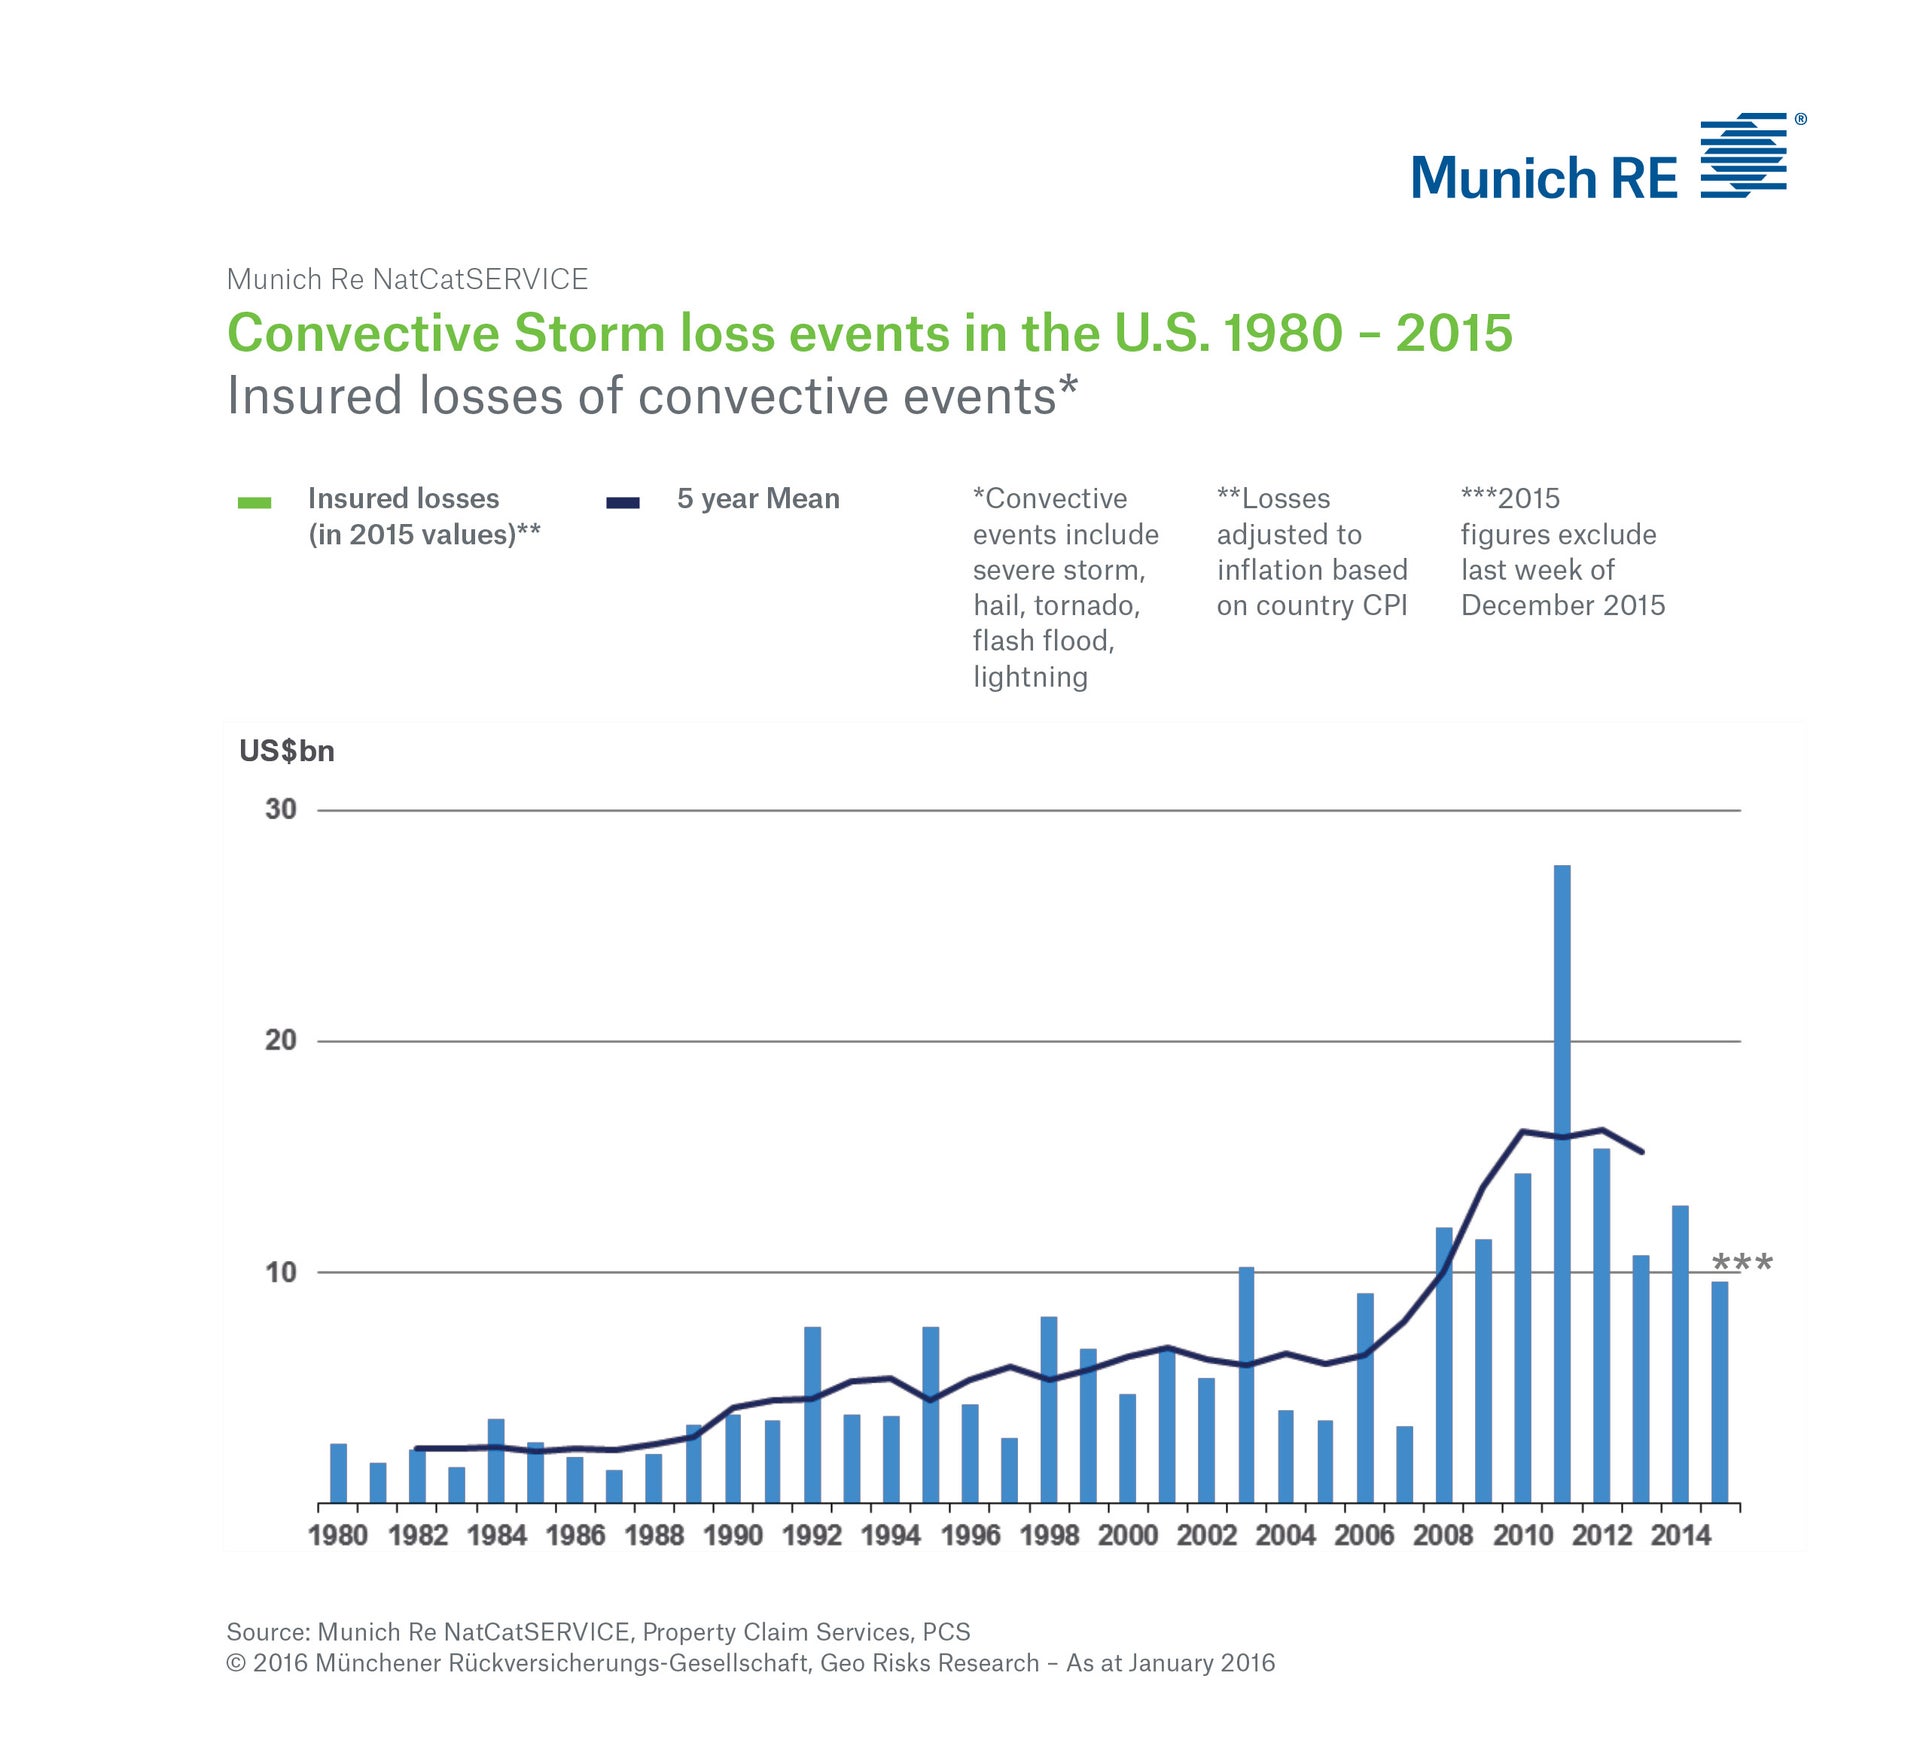 Convective Storm loss events in the U.S. 1980 - 2015